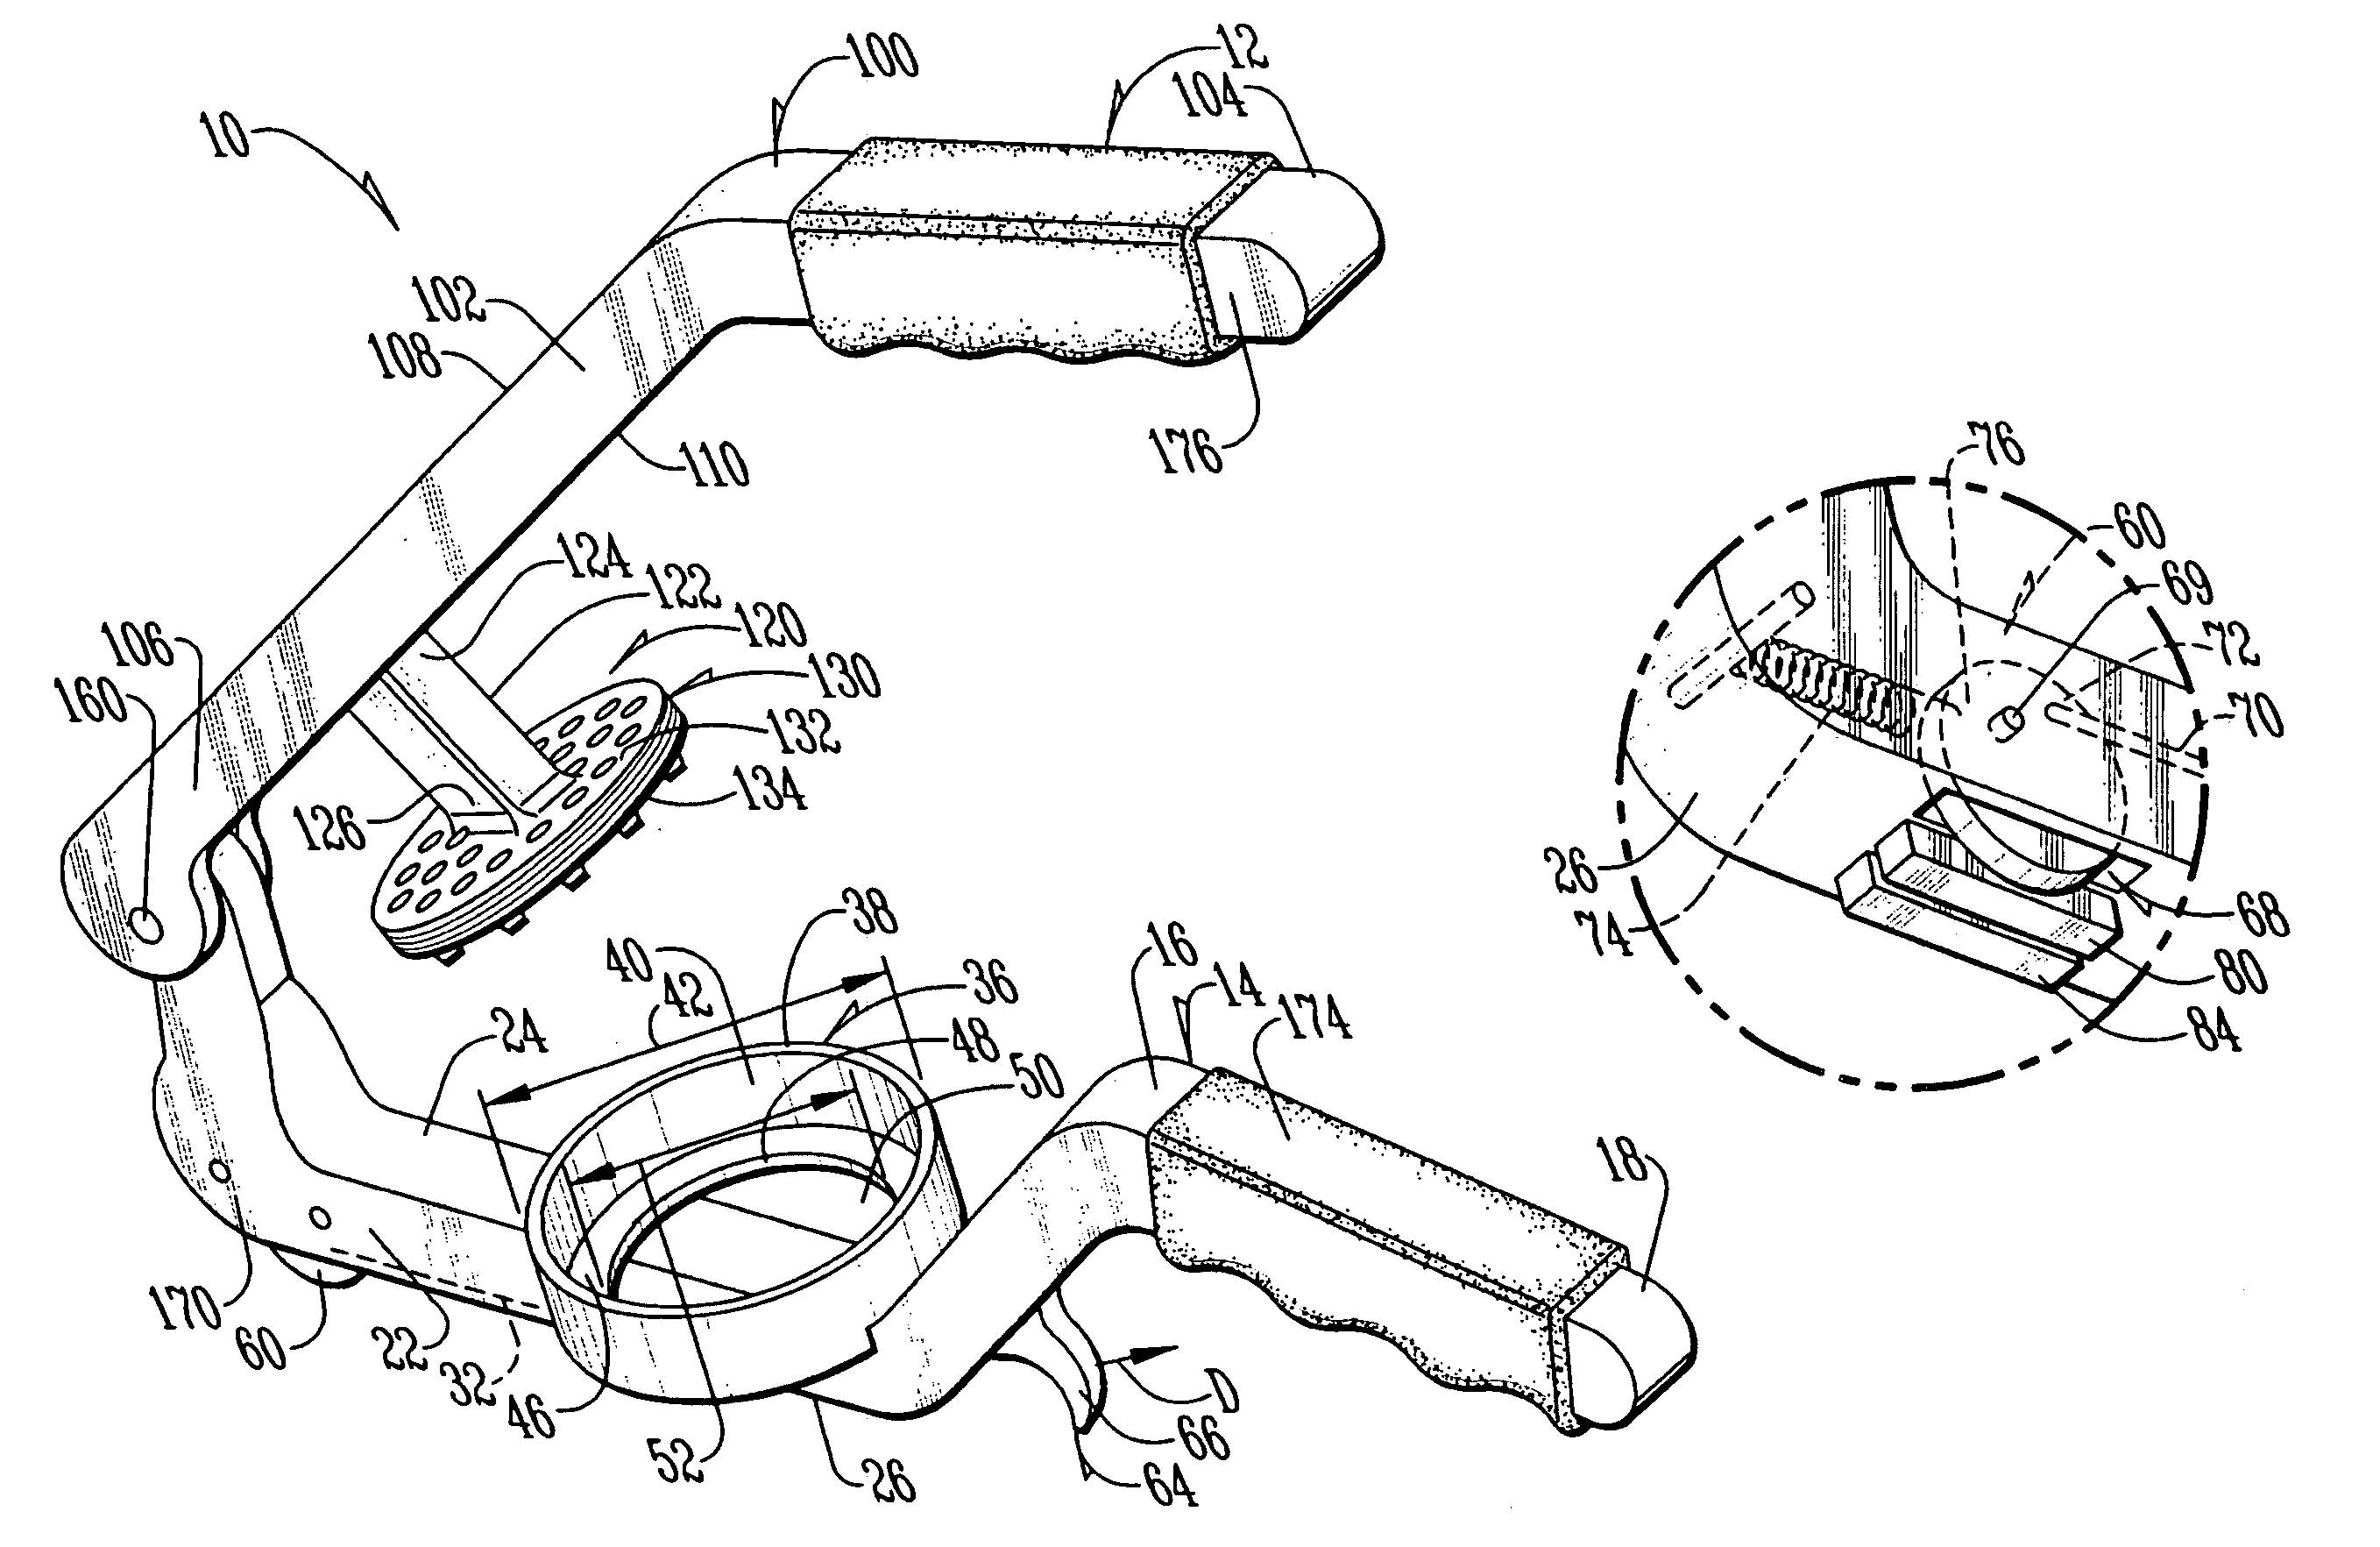 Device for squeezing fluid from a container of food packed in fluid